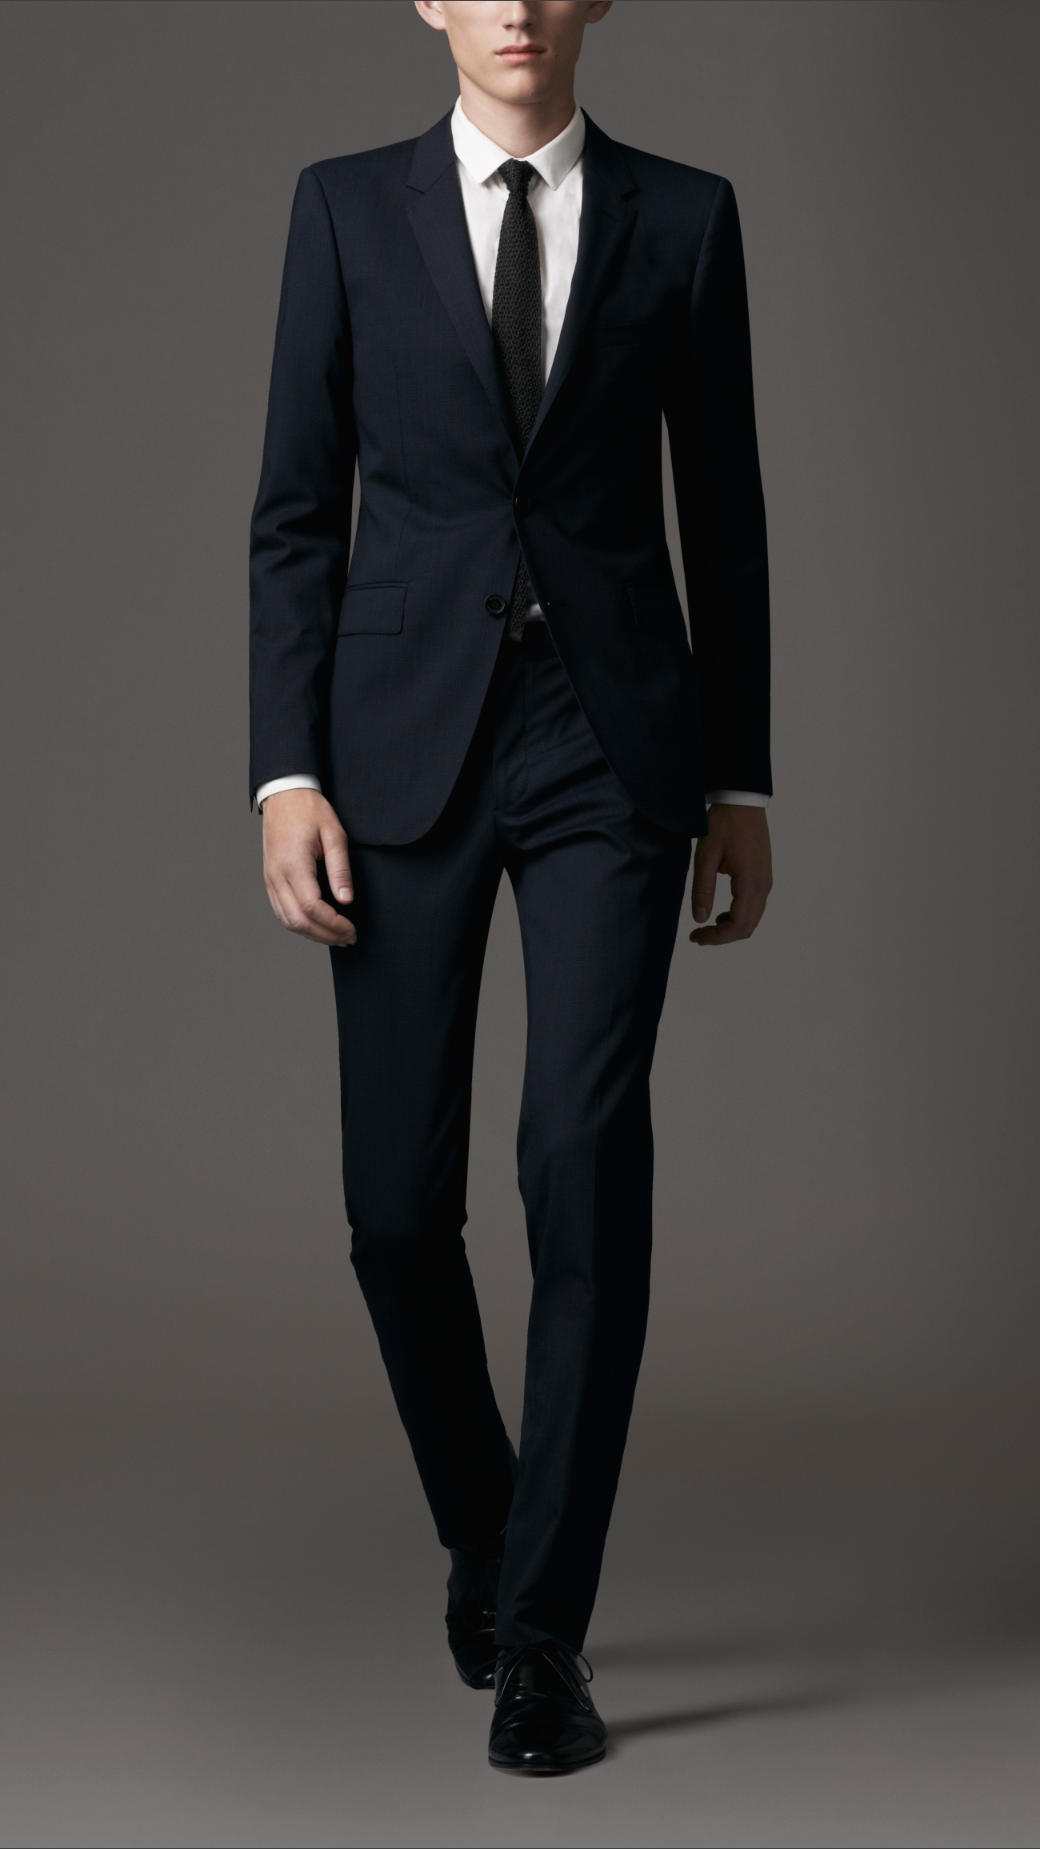 Lyst - Burberry Slim Fit Virgin Wool Prince Of Wales Check Suit in Blue ...